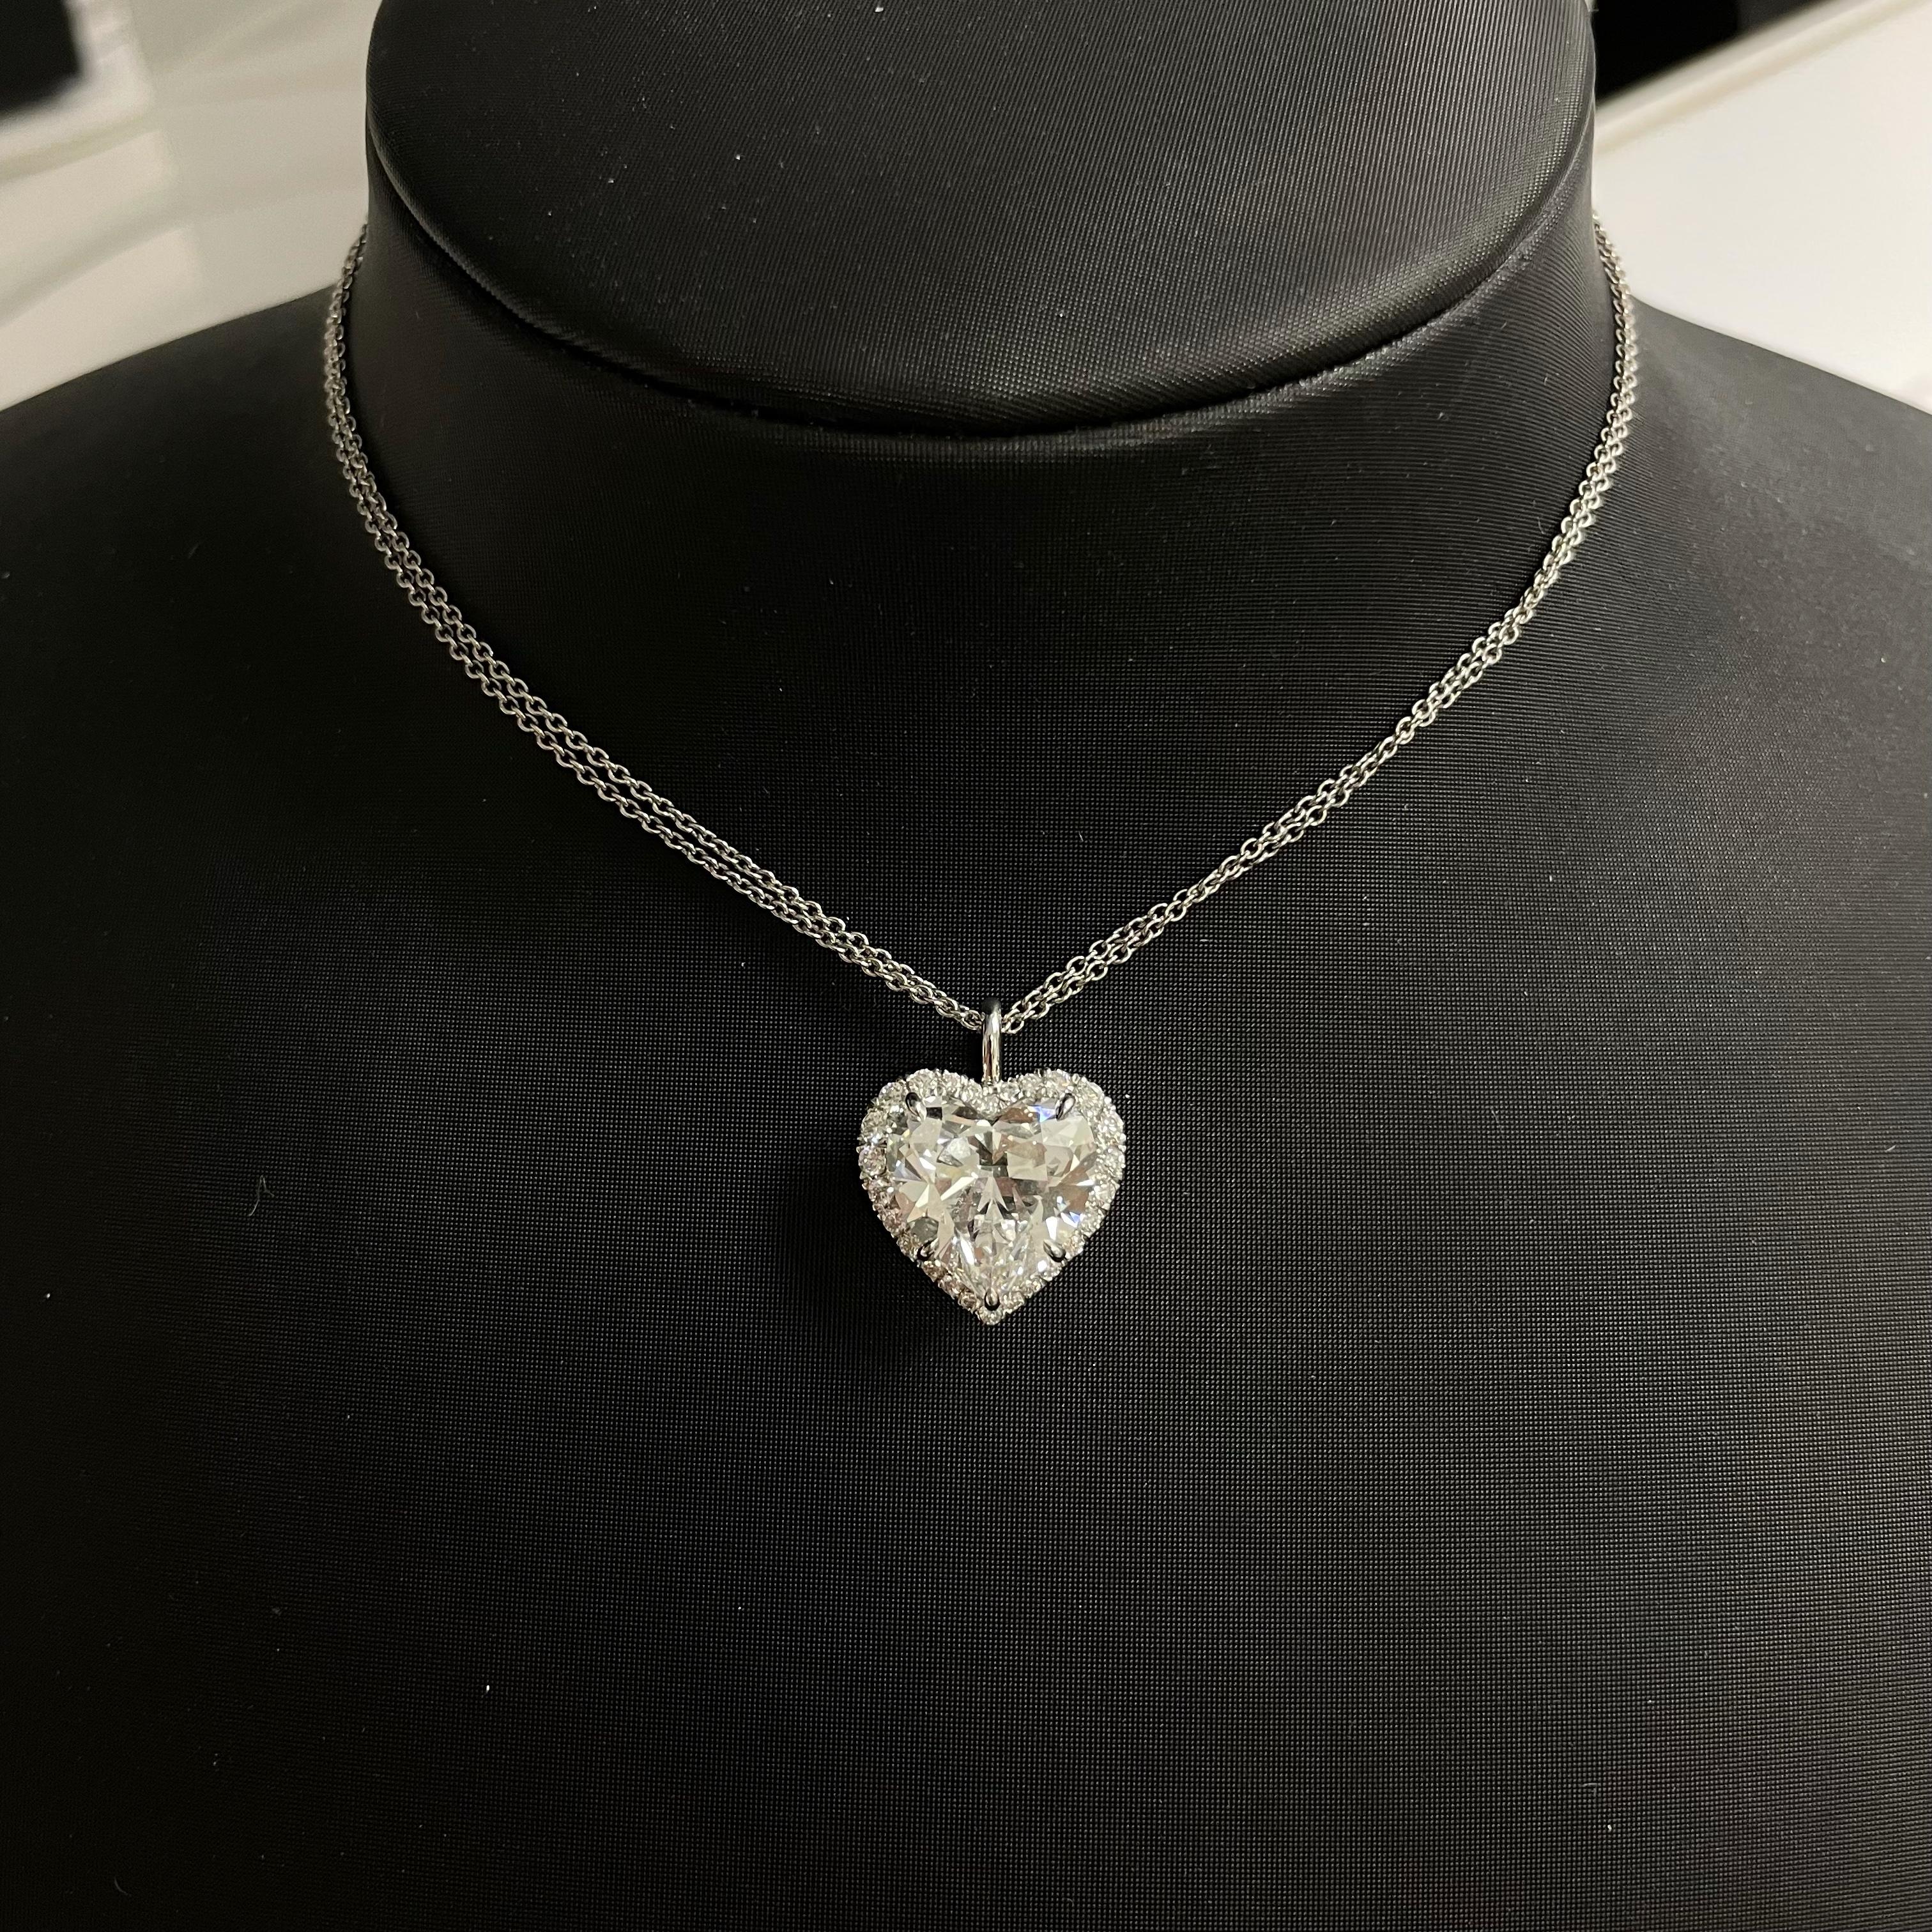 A bright and sparkly 5.02CT HEART SHAPE, E, VS1

set in Platinum 

with 26psc = 0.32cttw diamonds melee, 

GIA #2151768209